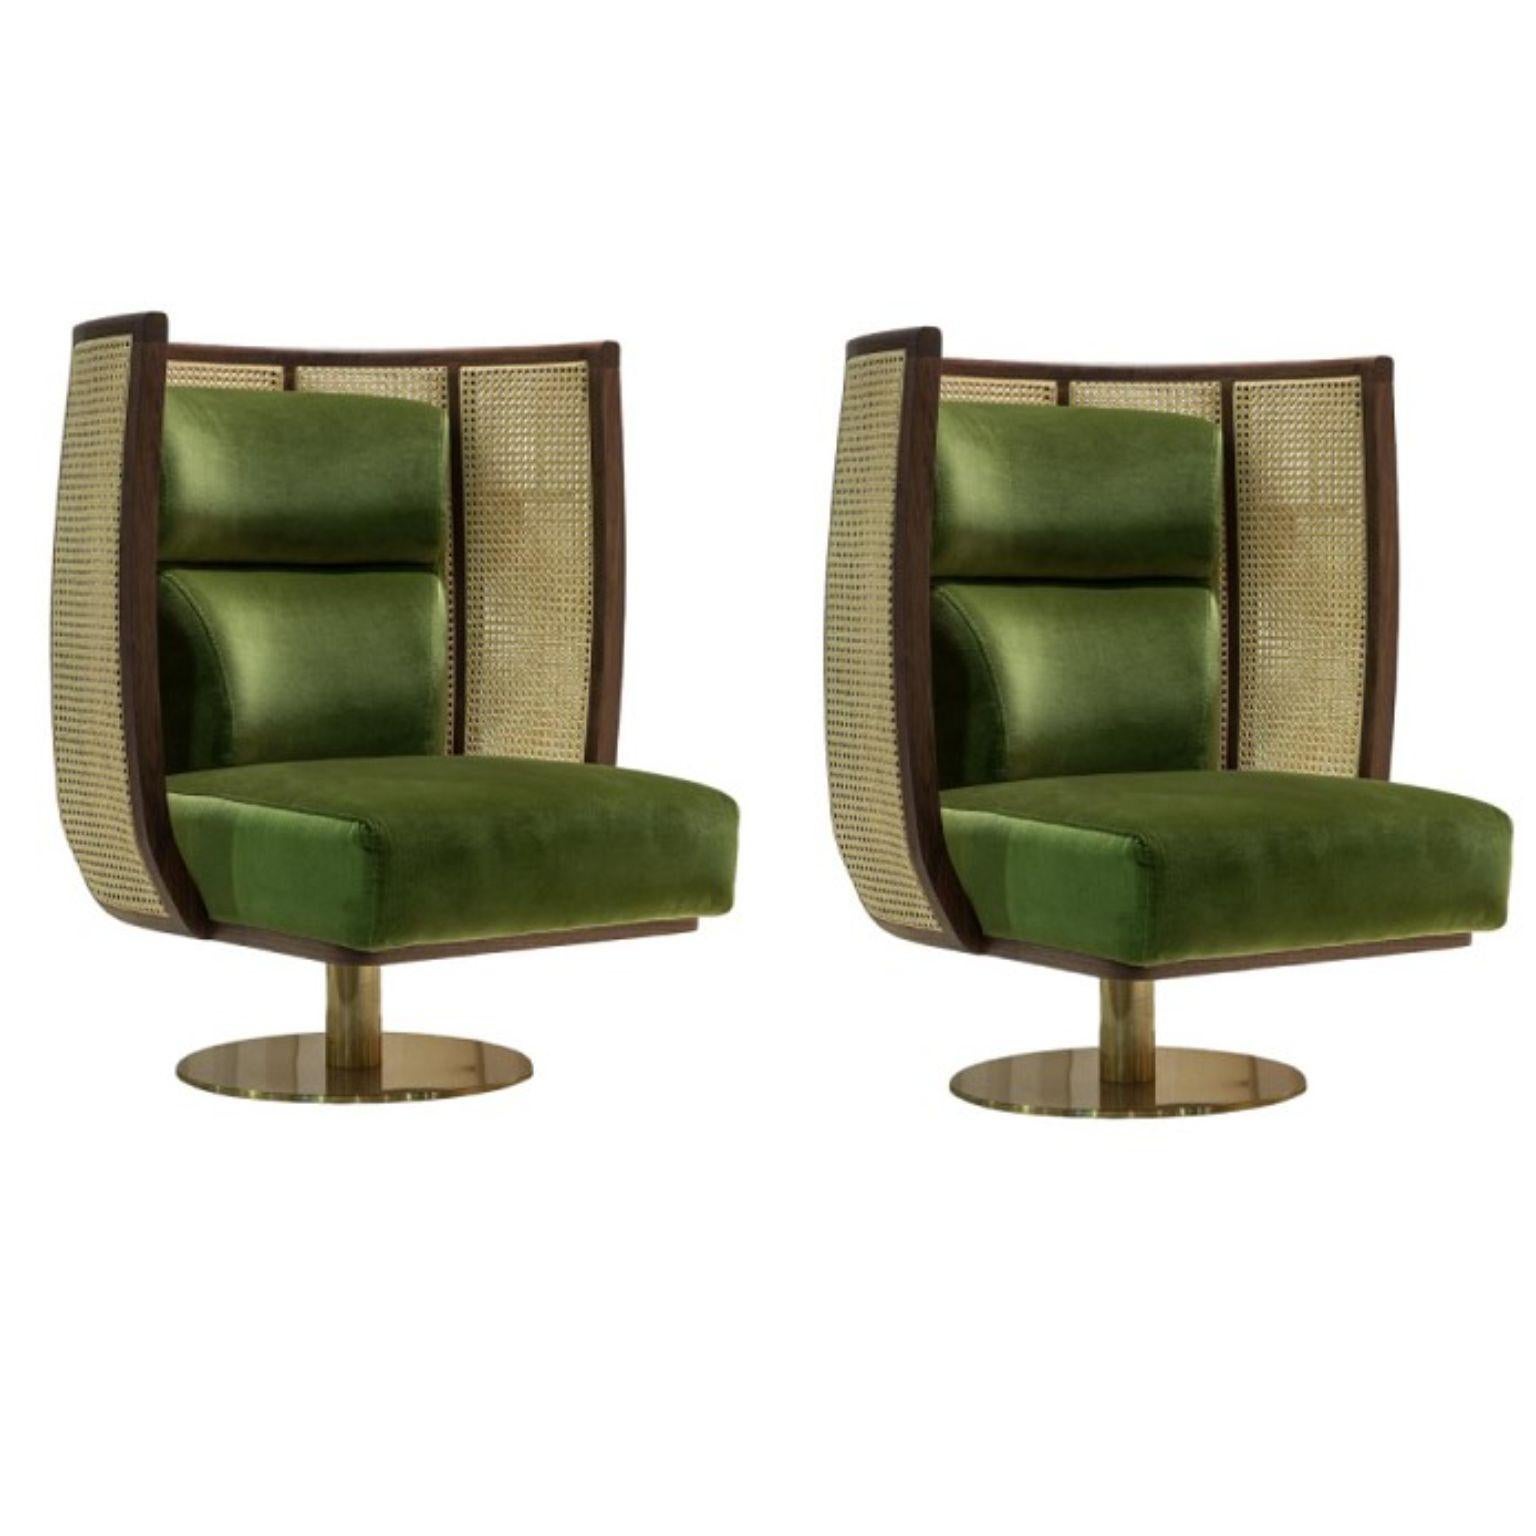 Set of 2 Egoista armchairs by Dooq
Measures: W 80 cm 32”
D 80 cm 32”
H 100 cm 39”
seat height 40 cm 16”

Materials: upholstery fabric or leather; structure solid wood feet lacquered MDF or solid wood rattan natural rattan. COM with natural walnut or